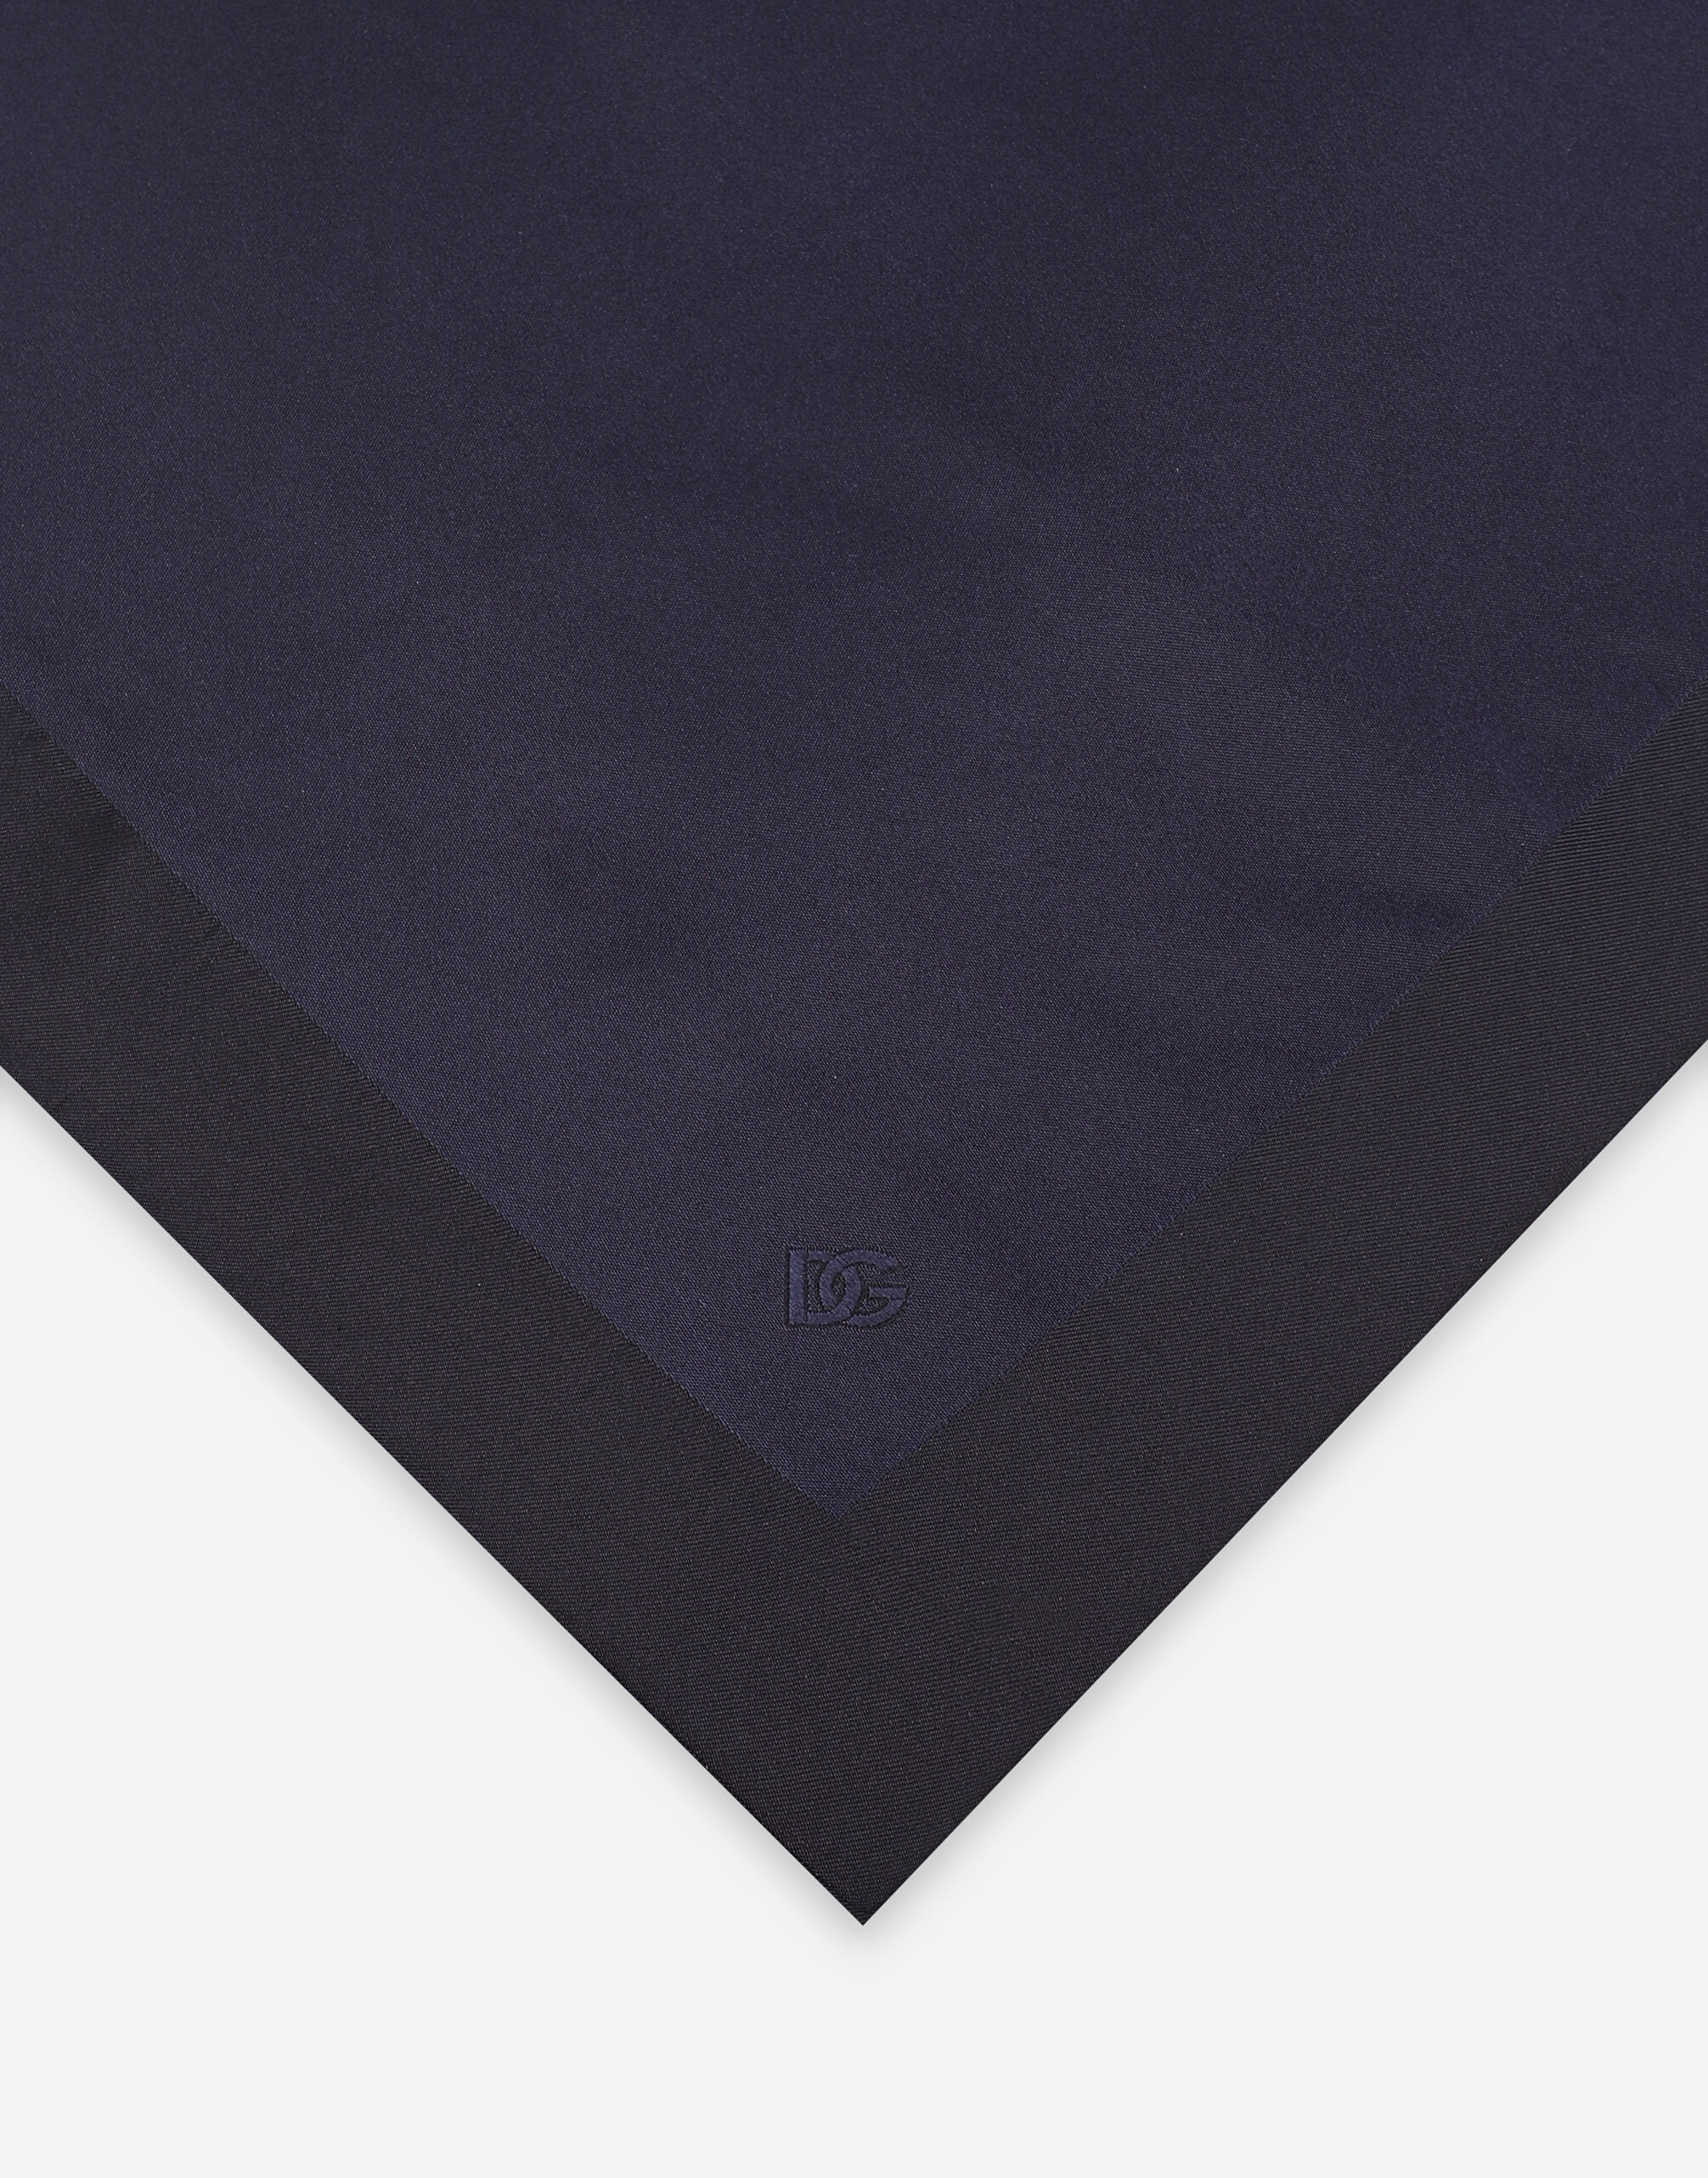 Silk pocket square with DG logo embroidery - 2